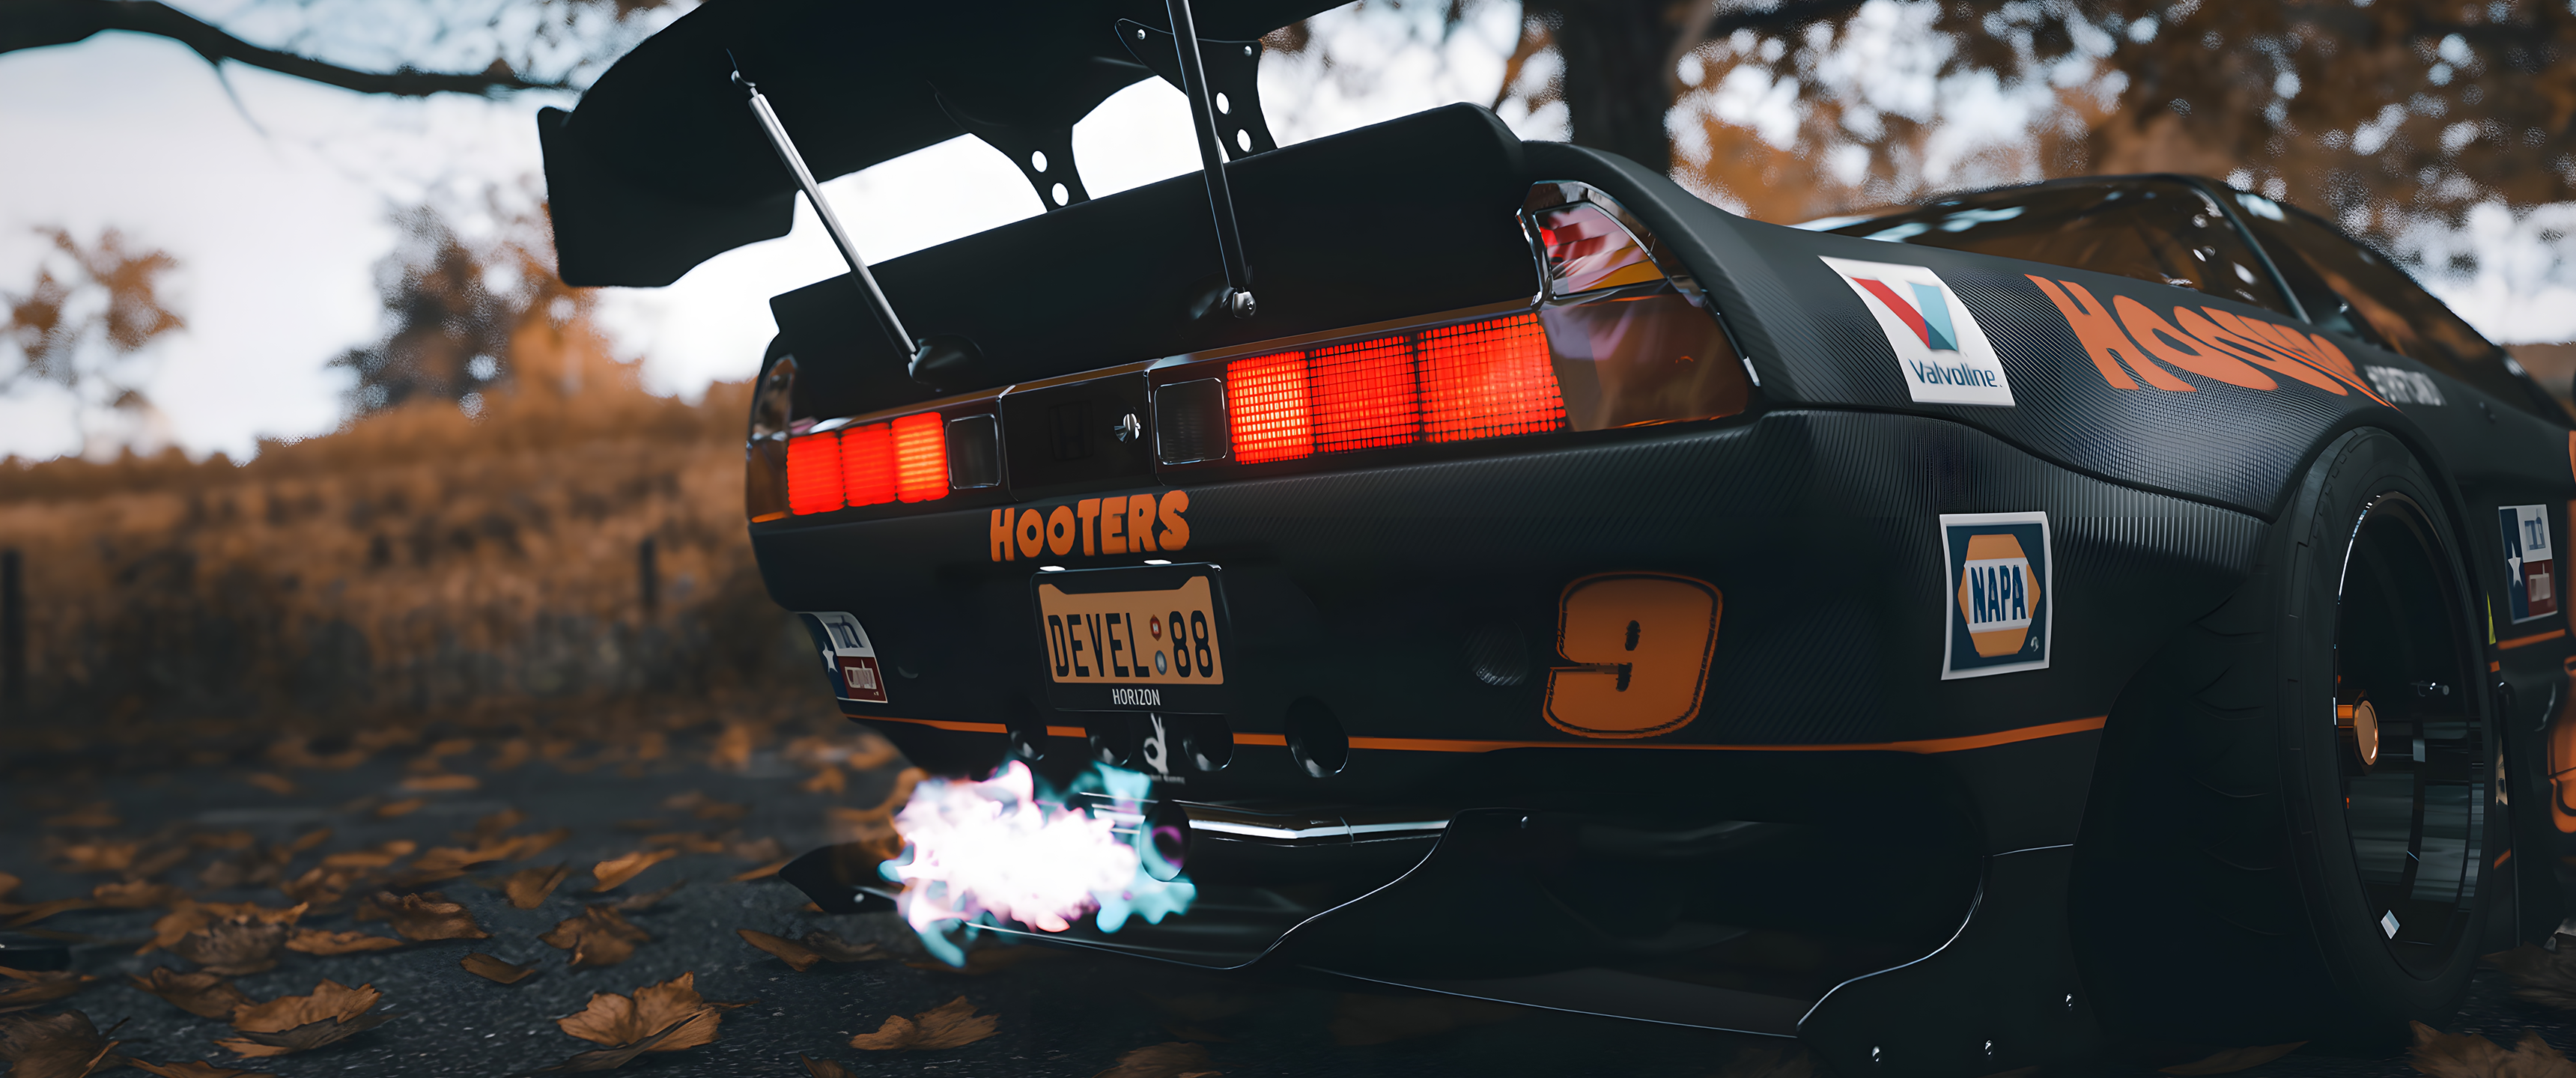 General 3440x1440 car supercars ultrawide licence plates rear view taillights depth of field leaves Hooters vehicle CGI video games trees video game art Forza Forza Horizon bodykit Honda NSX Japanese cars PlaygroundGames